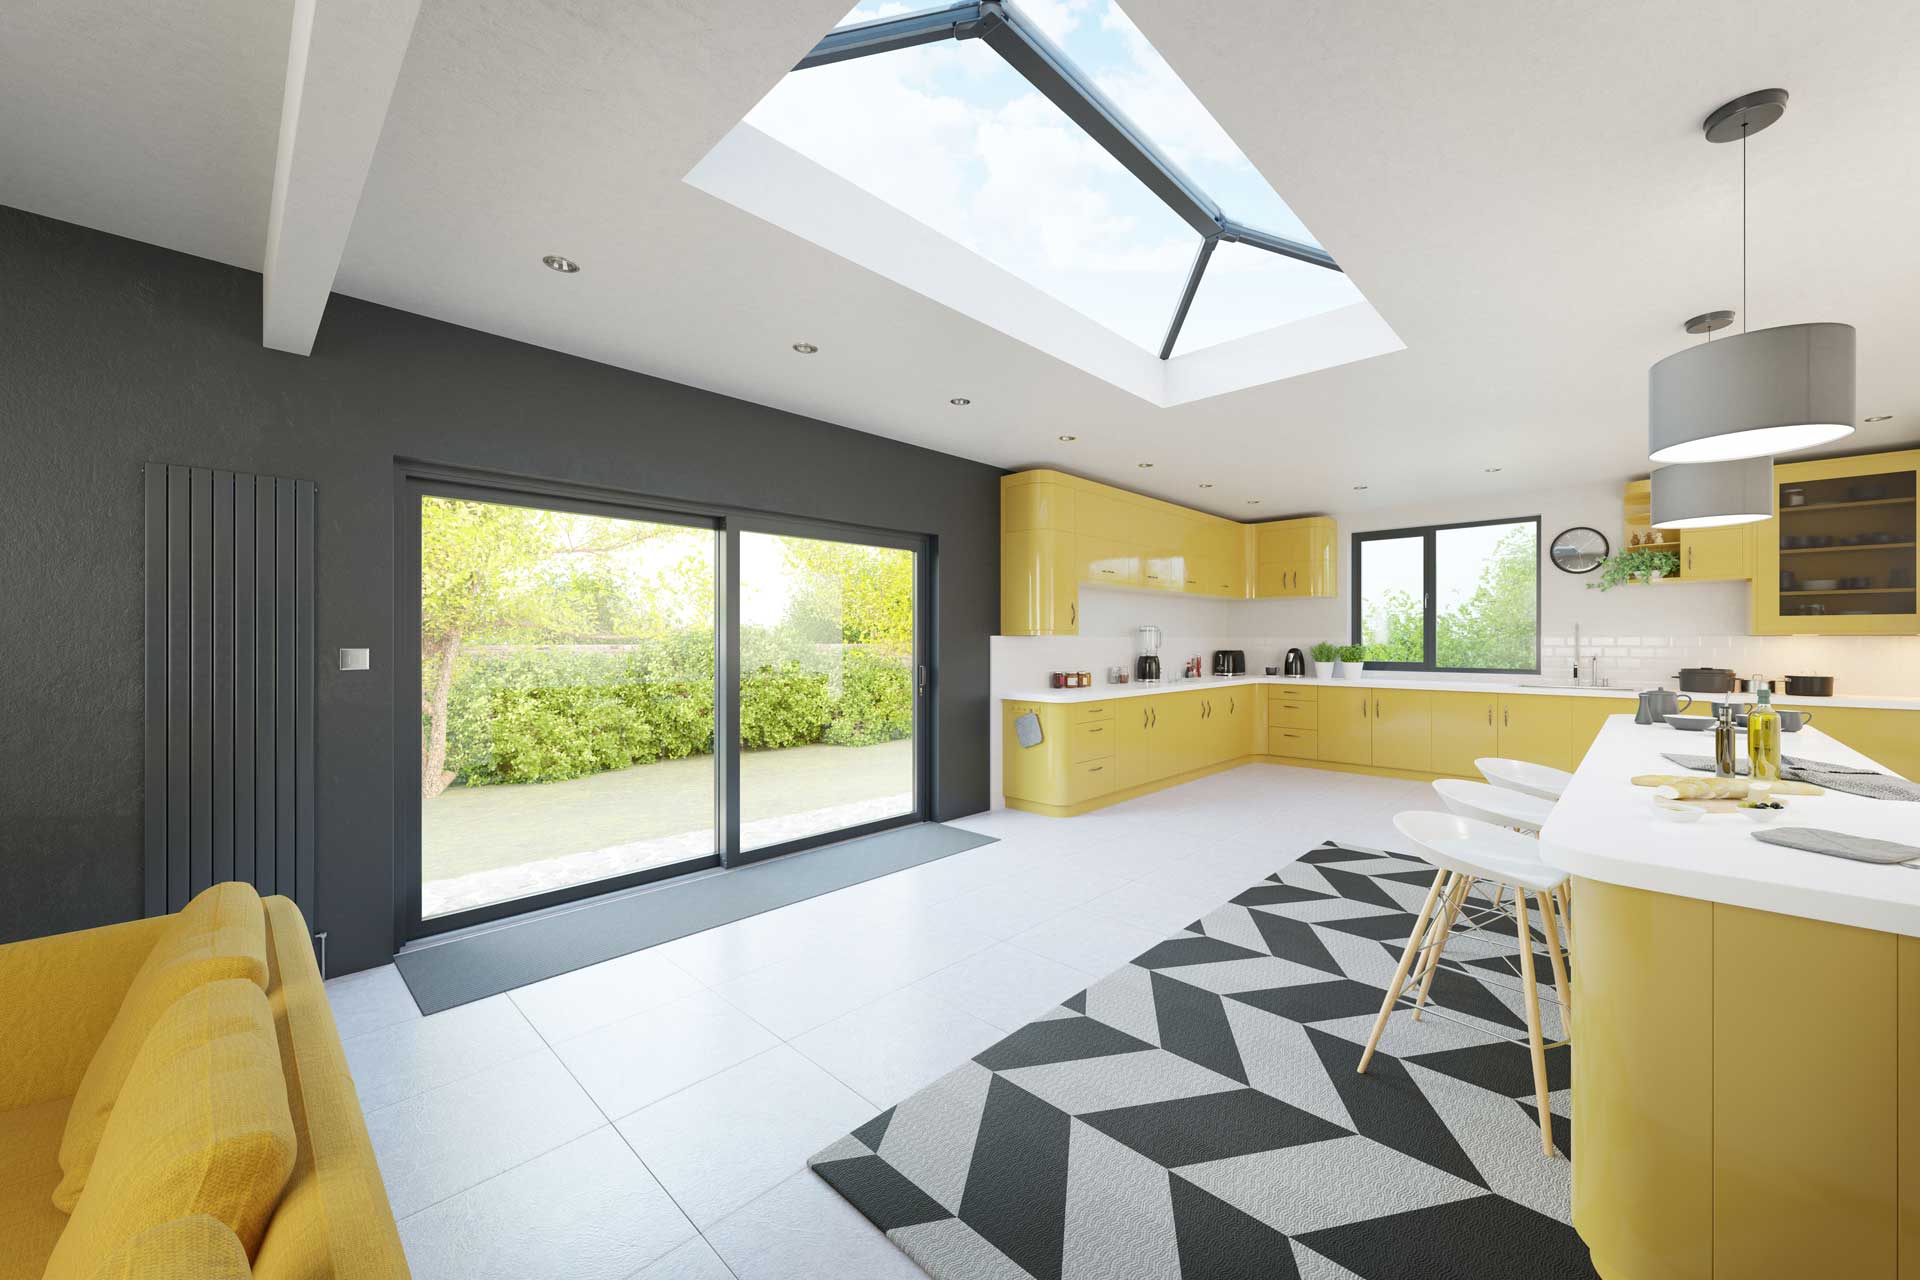 roof lanterns stafford quote